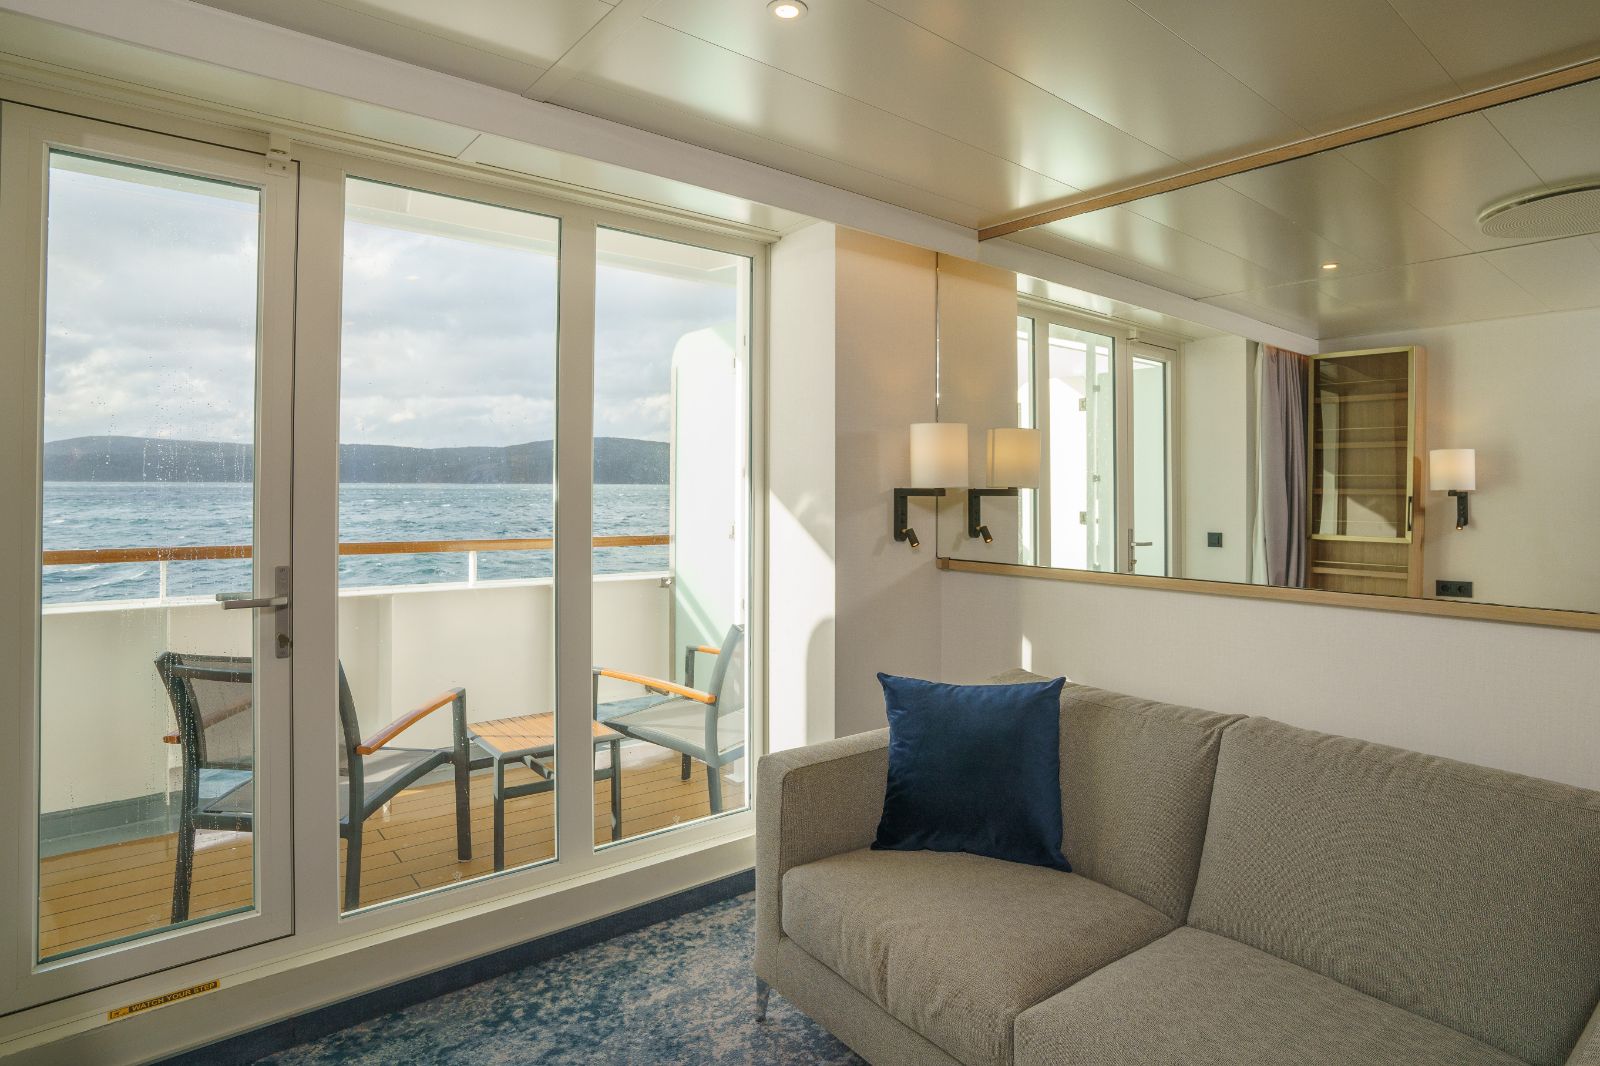 A balcony suite onboard Ultramarine Antarctic expedition cruise